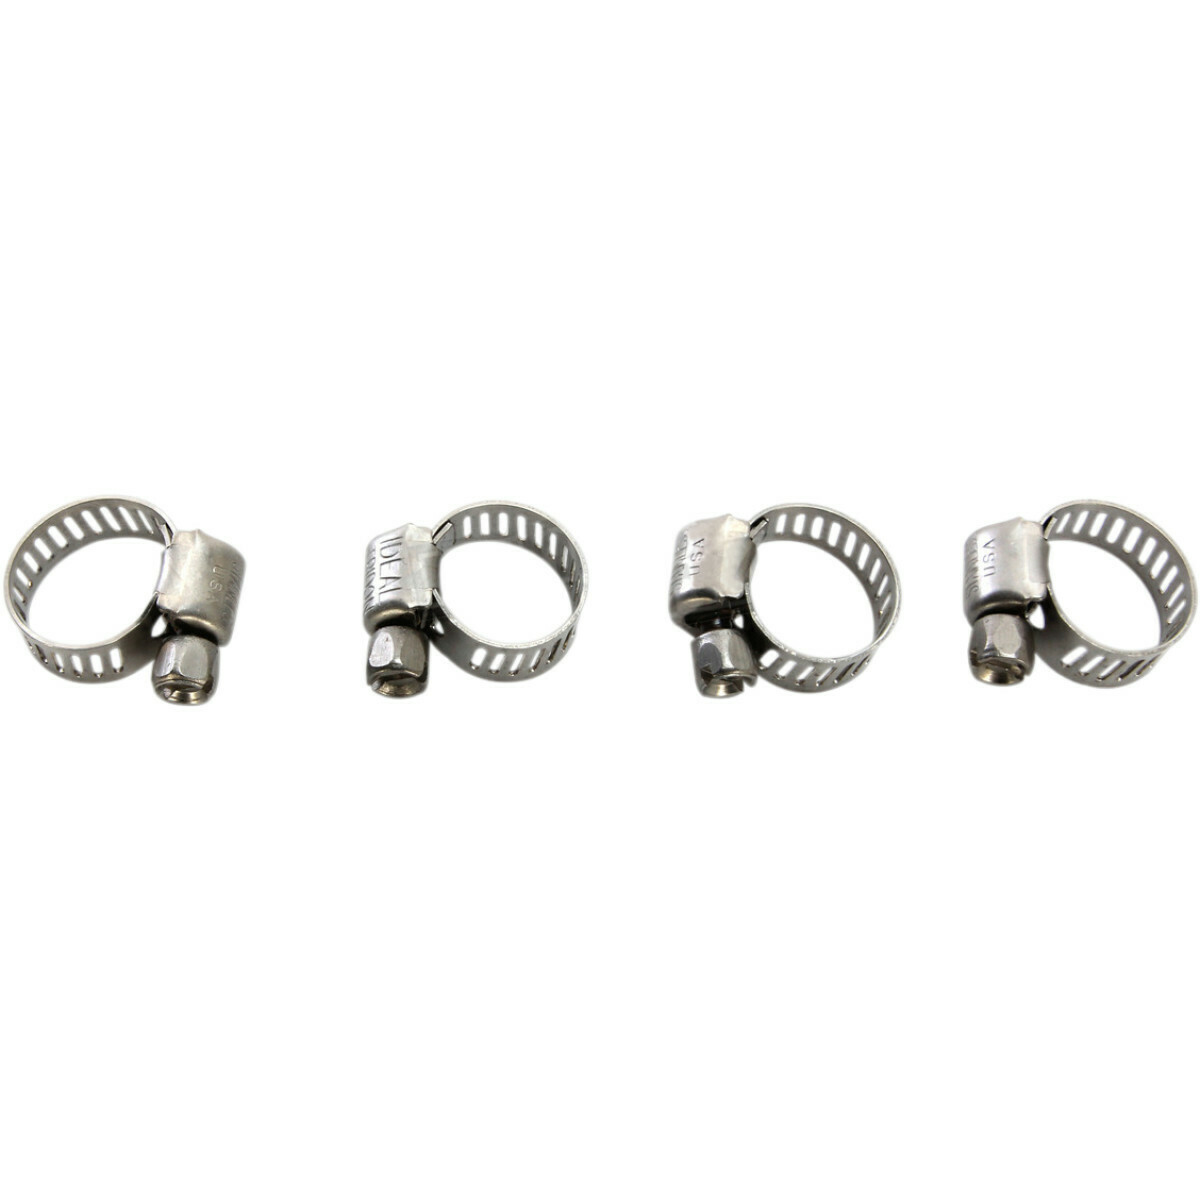 MOOSE RACING HARD-PARTS
HOSE CLAMPS 6-16MM 4-PACK